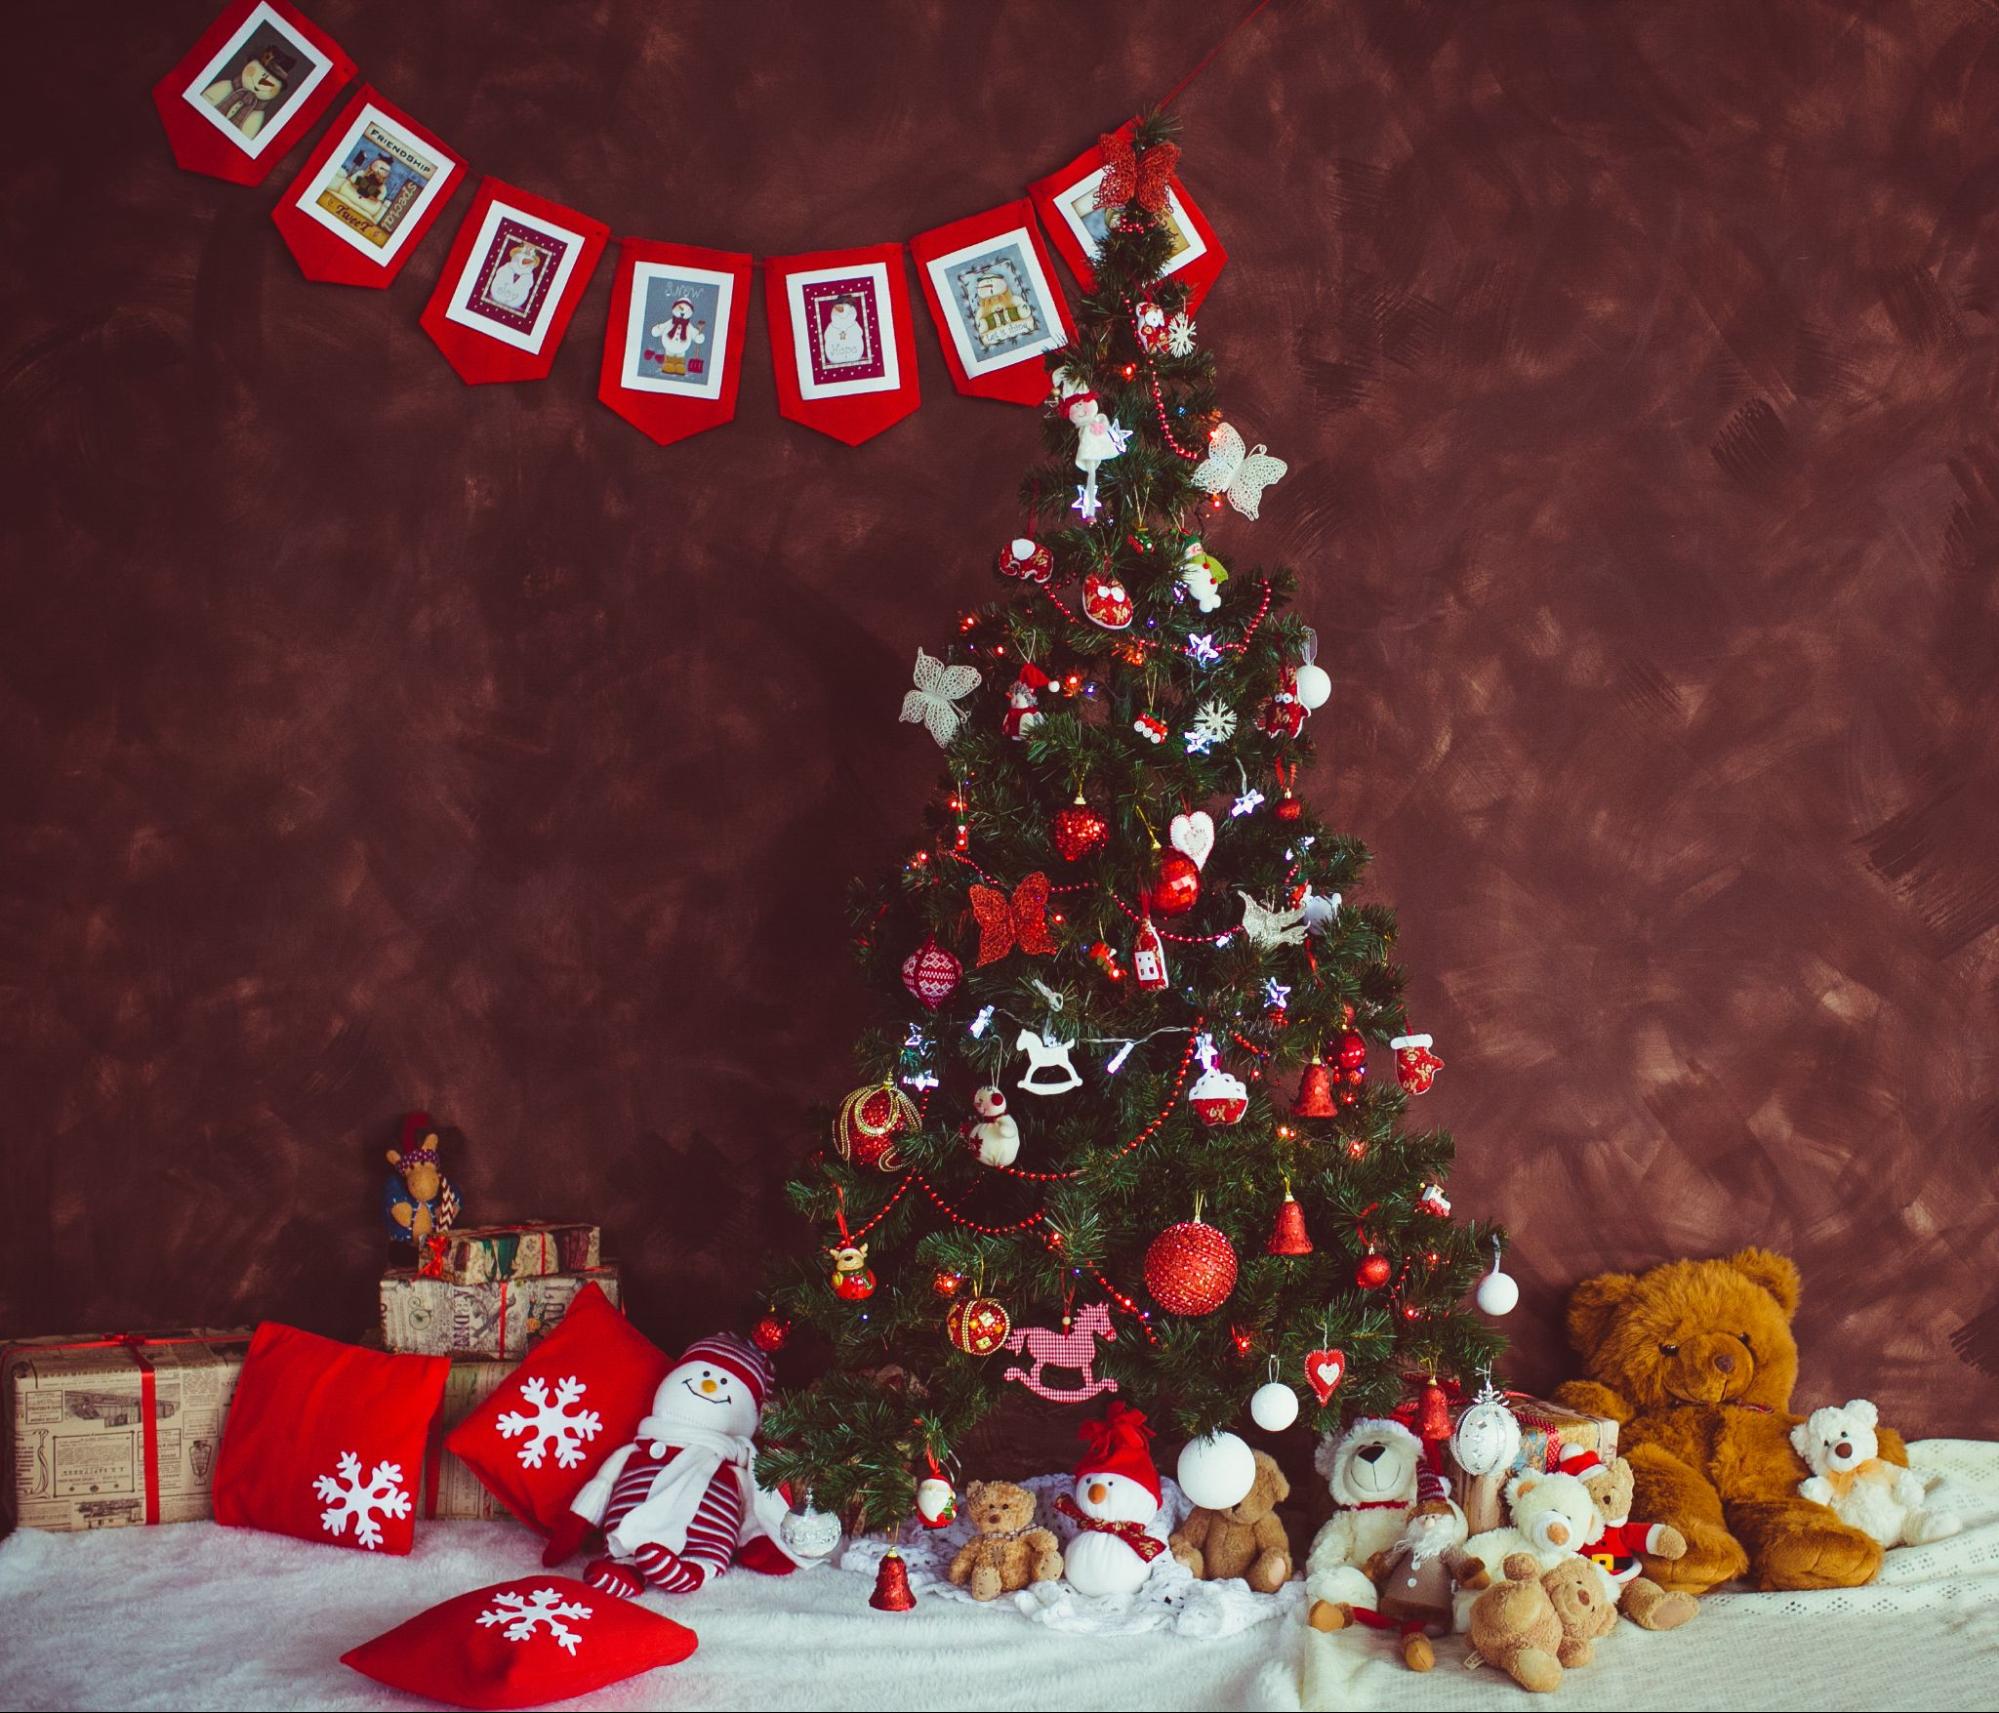 Festive Christmas tree and presents on a warm brown backdrop.